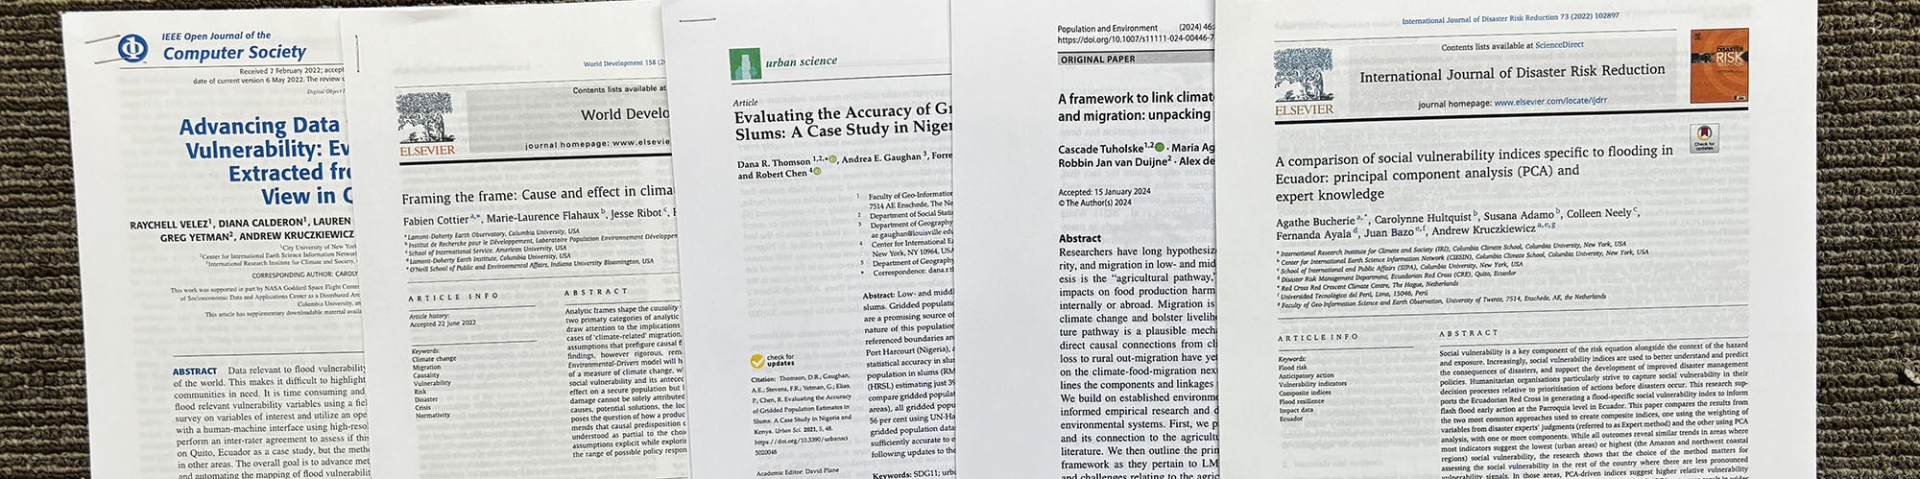 Photo of printed journal articles published by CIESIN staff